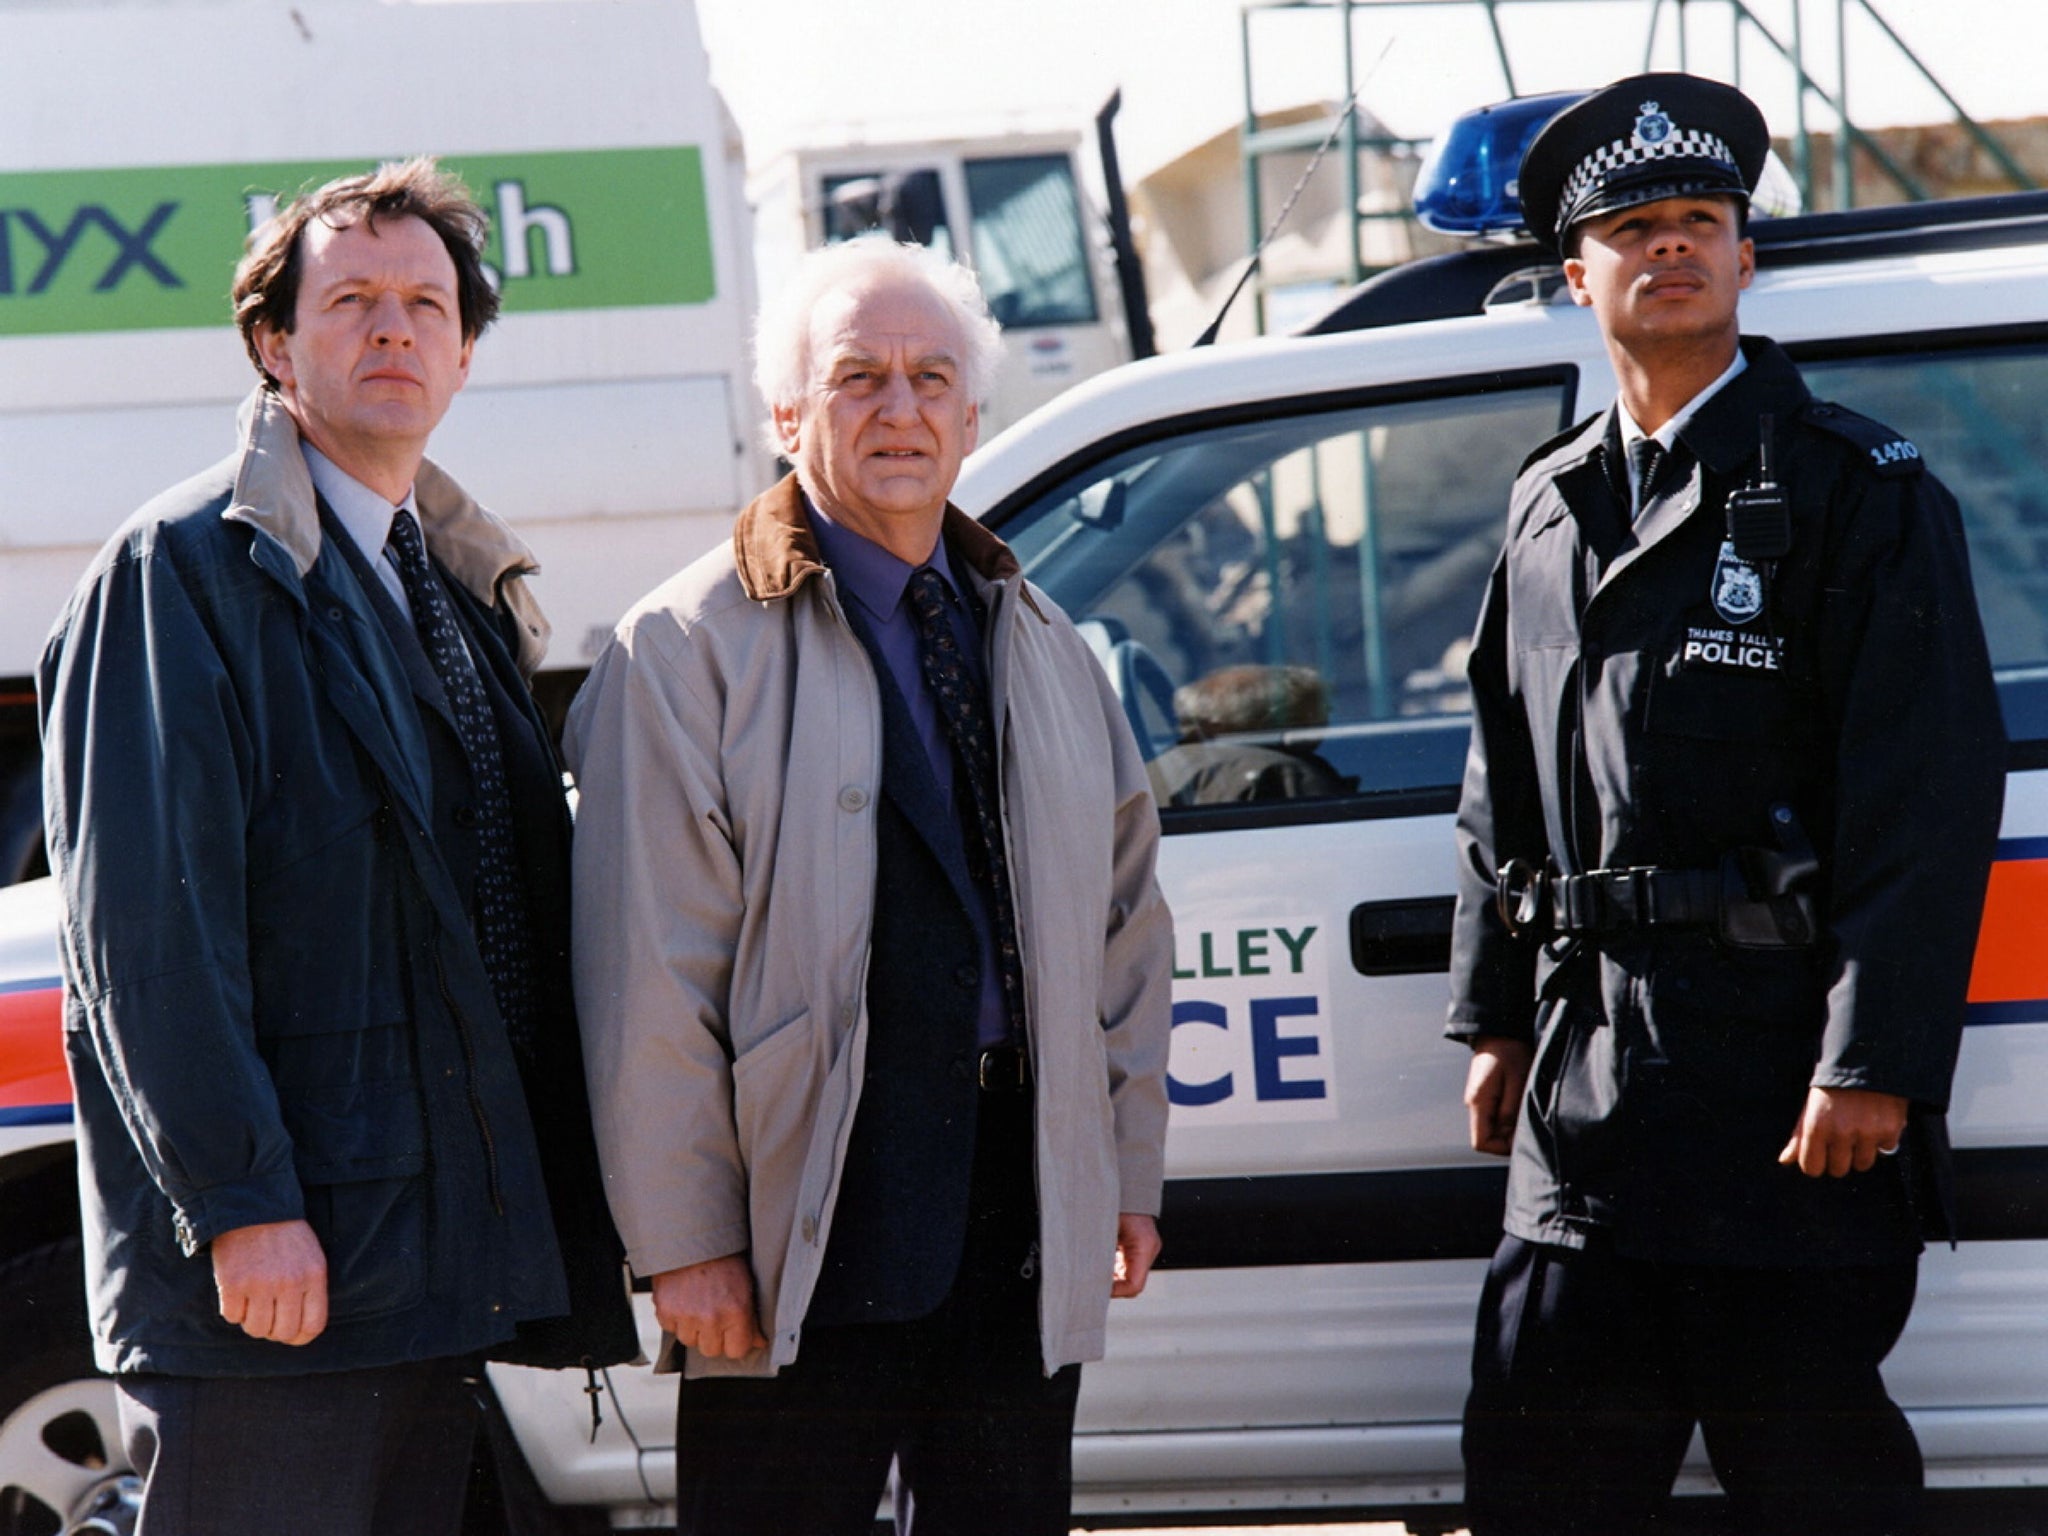 The ‘Inspector Morse’ series comprised 33 two-hour films broadcast by ITV between 1987 and 2000